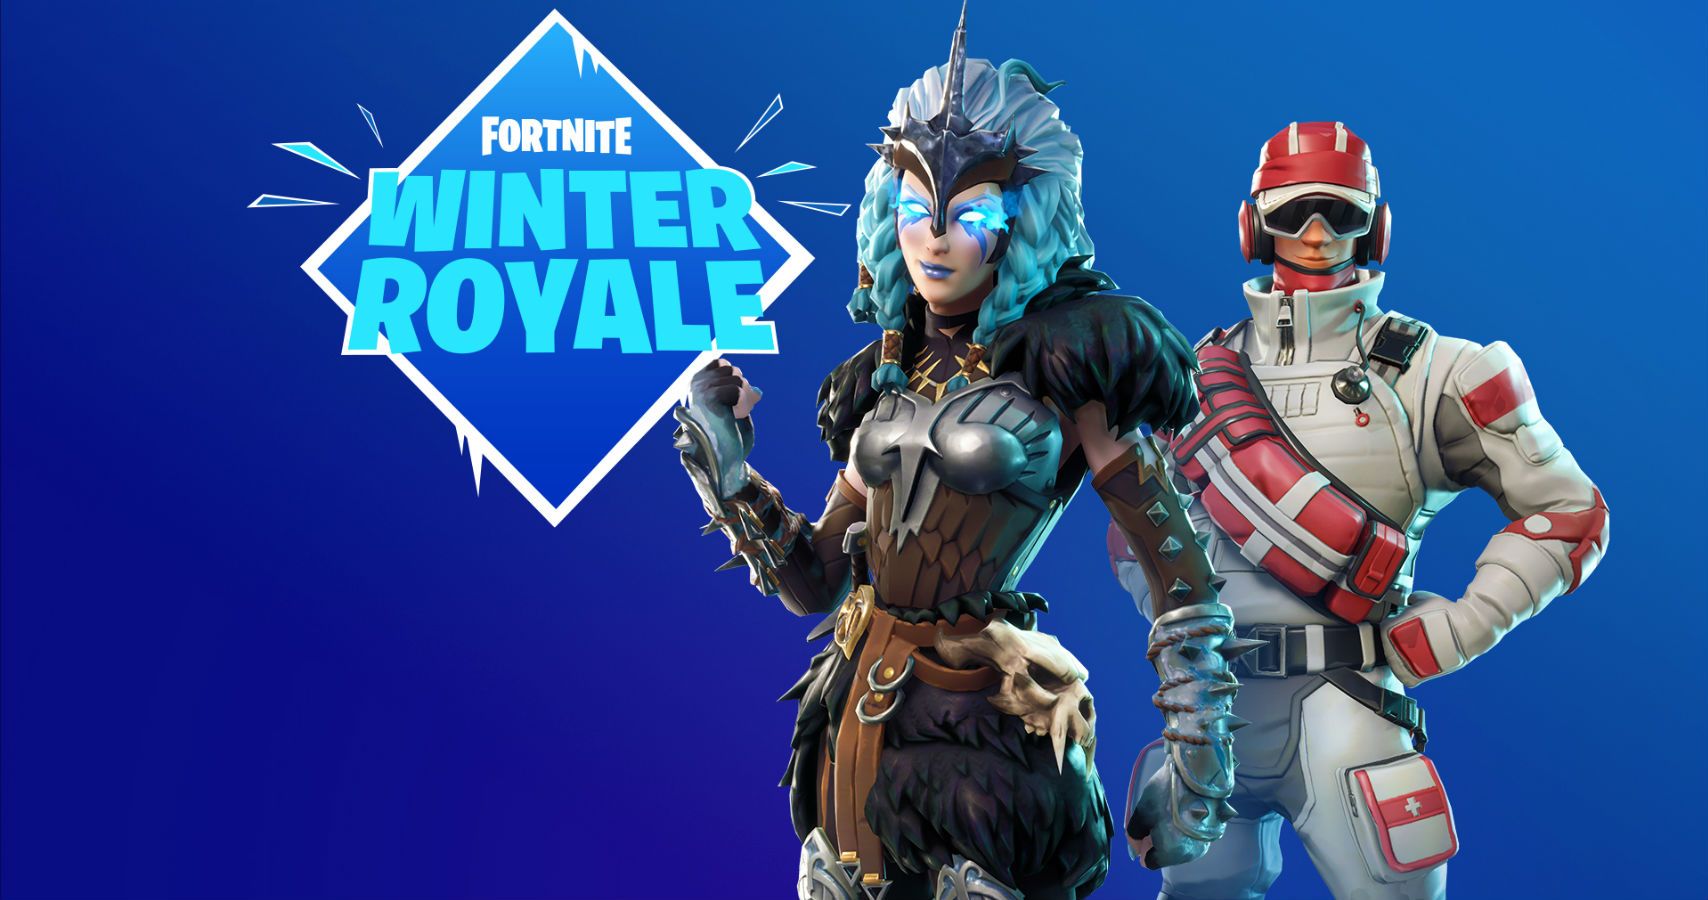 Everything You Need To Know About Fortnite's Winter Royale